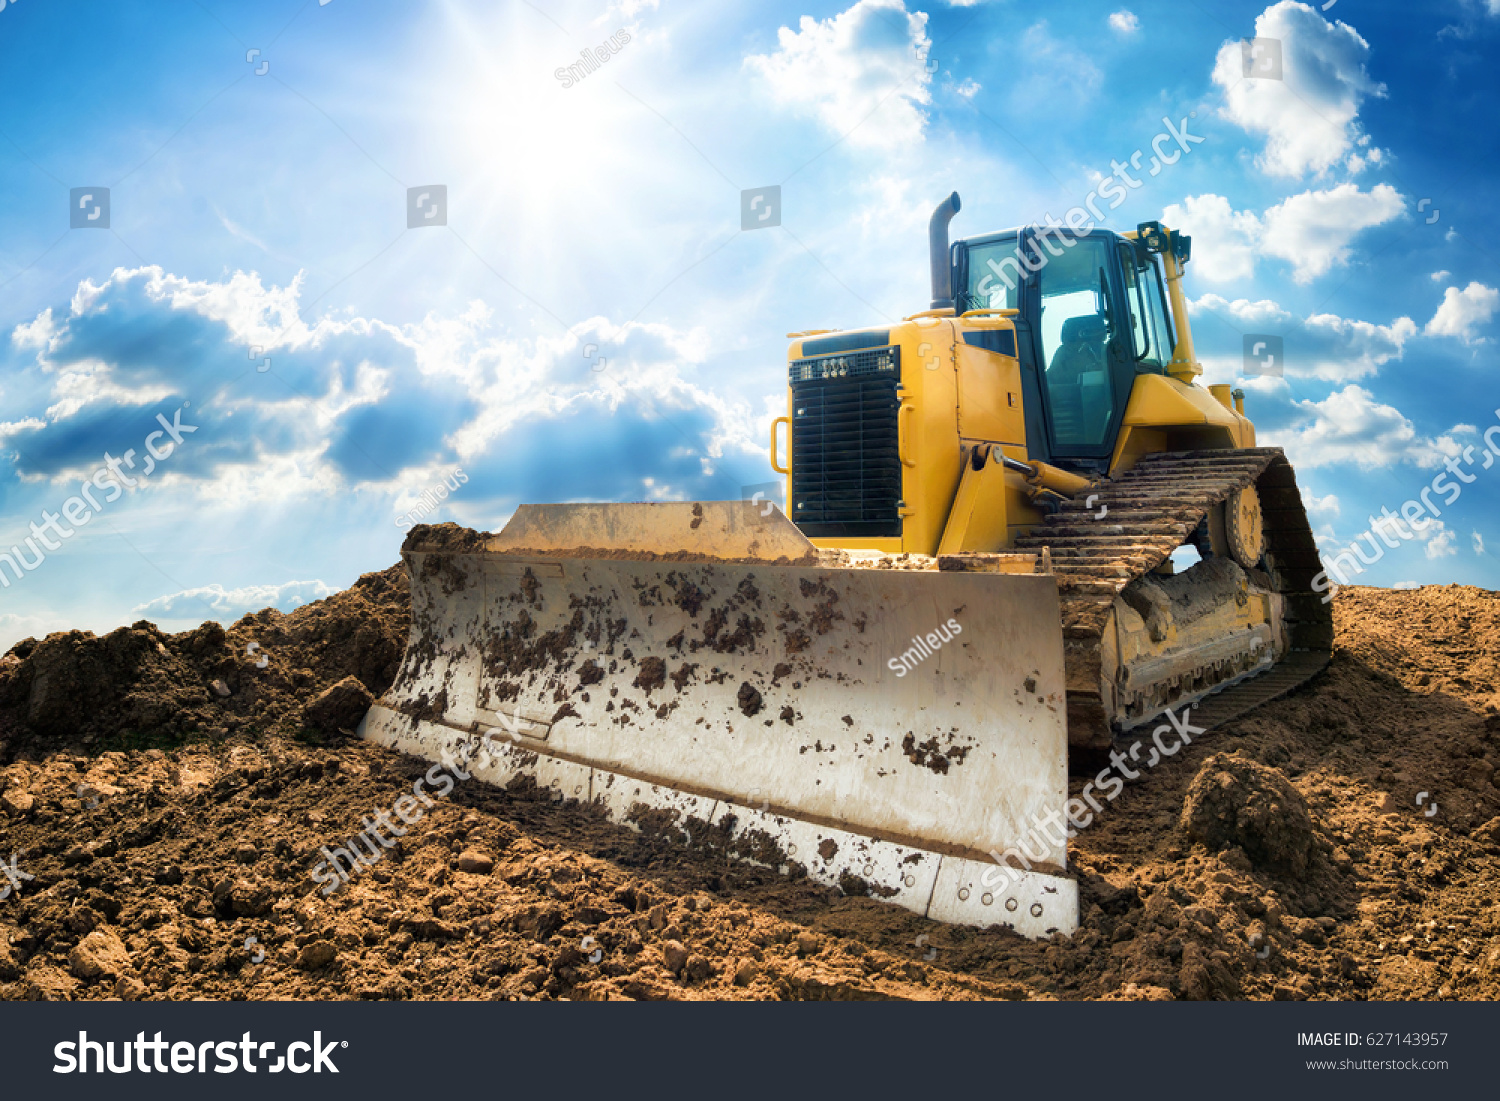 Yellow excavator on new construction site, with the bright sun and nice blue sky in the background #627143957